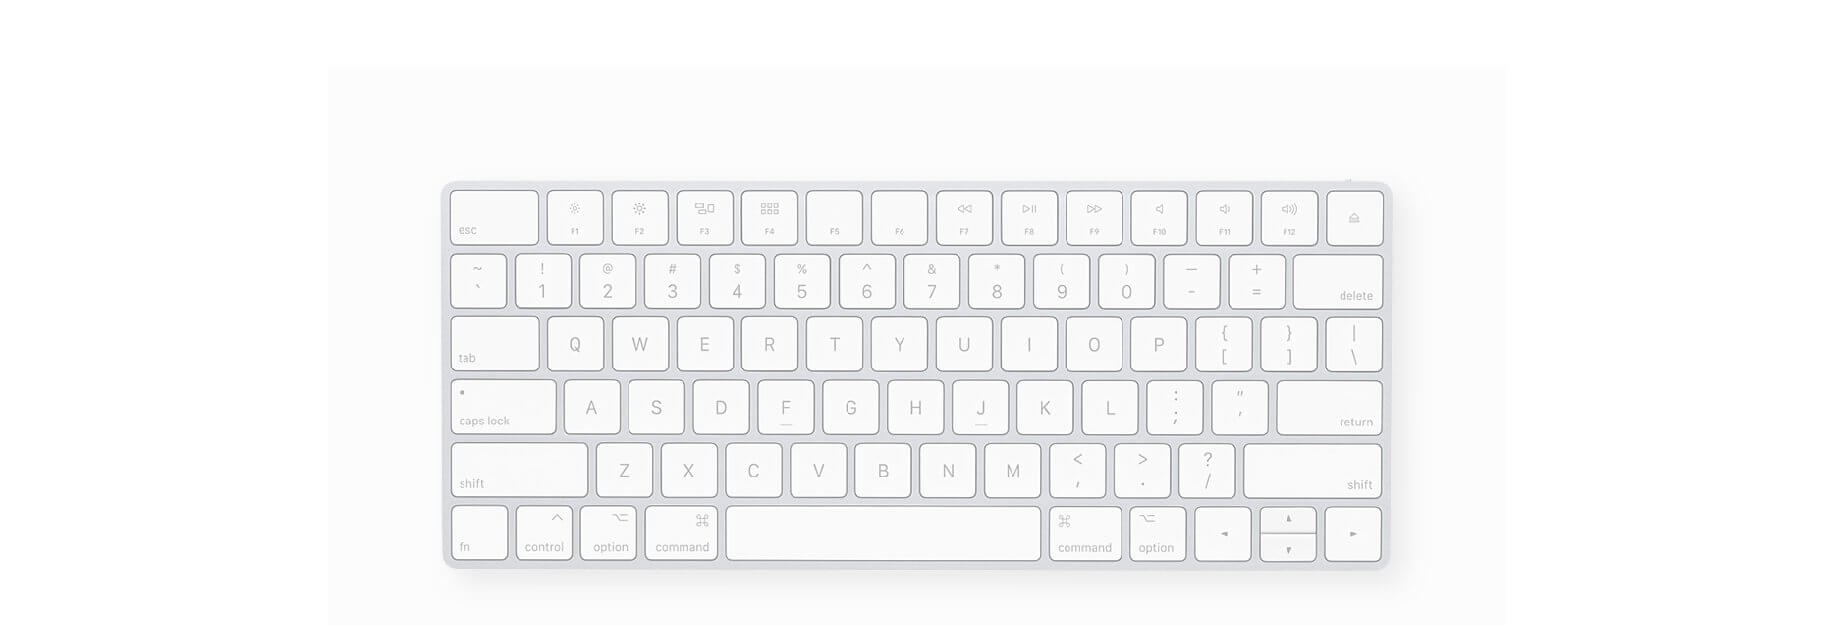 How to view available keyboard  shortcuts in every Mac app